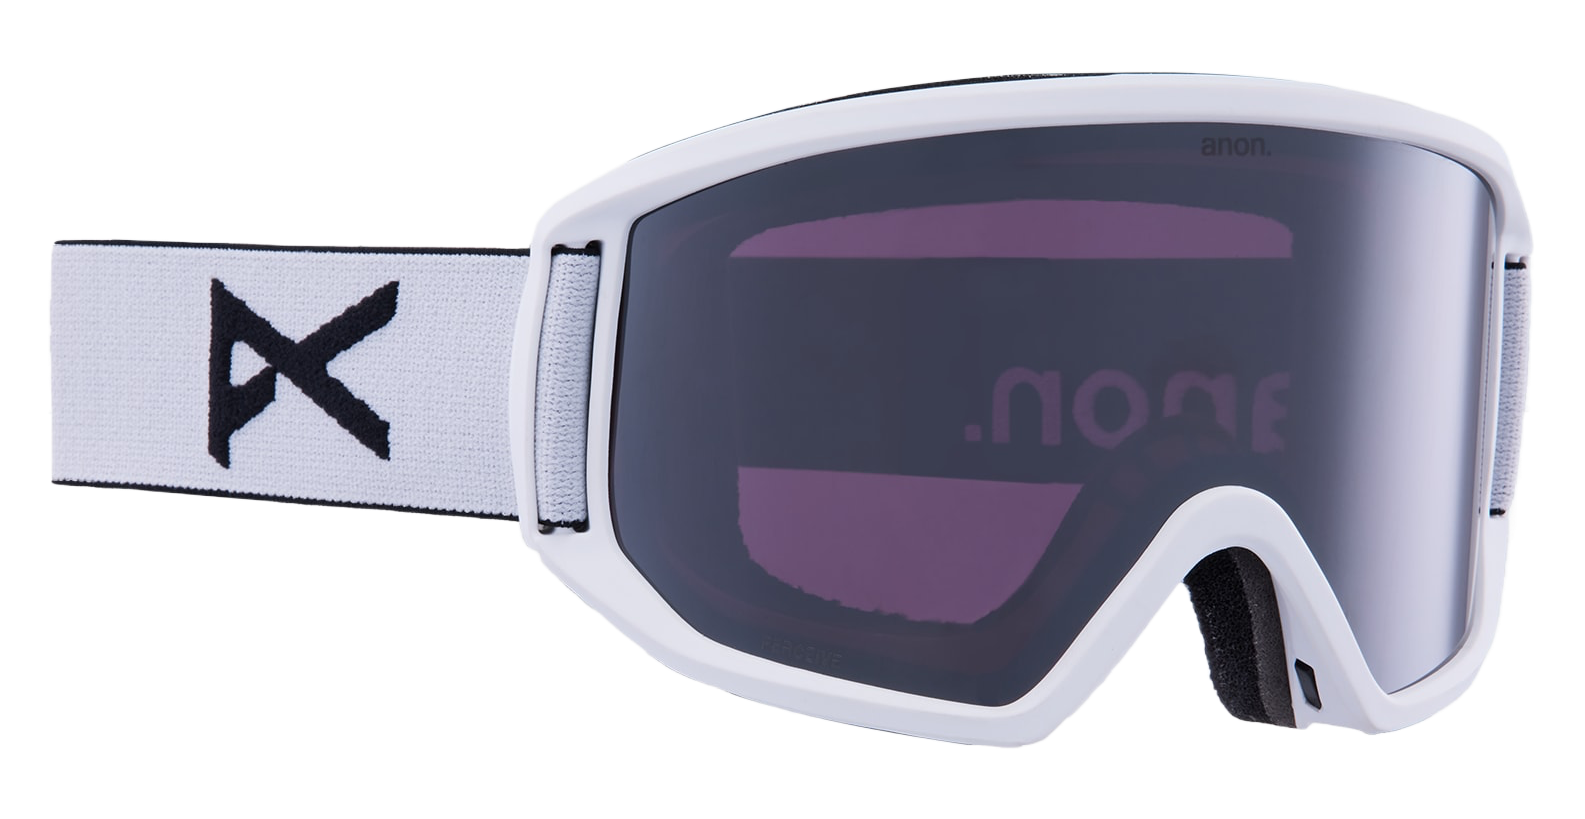 Anon Relapse Goggles - White with Perceive Sunny Onyx lens